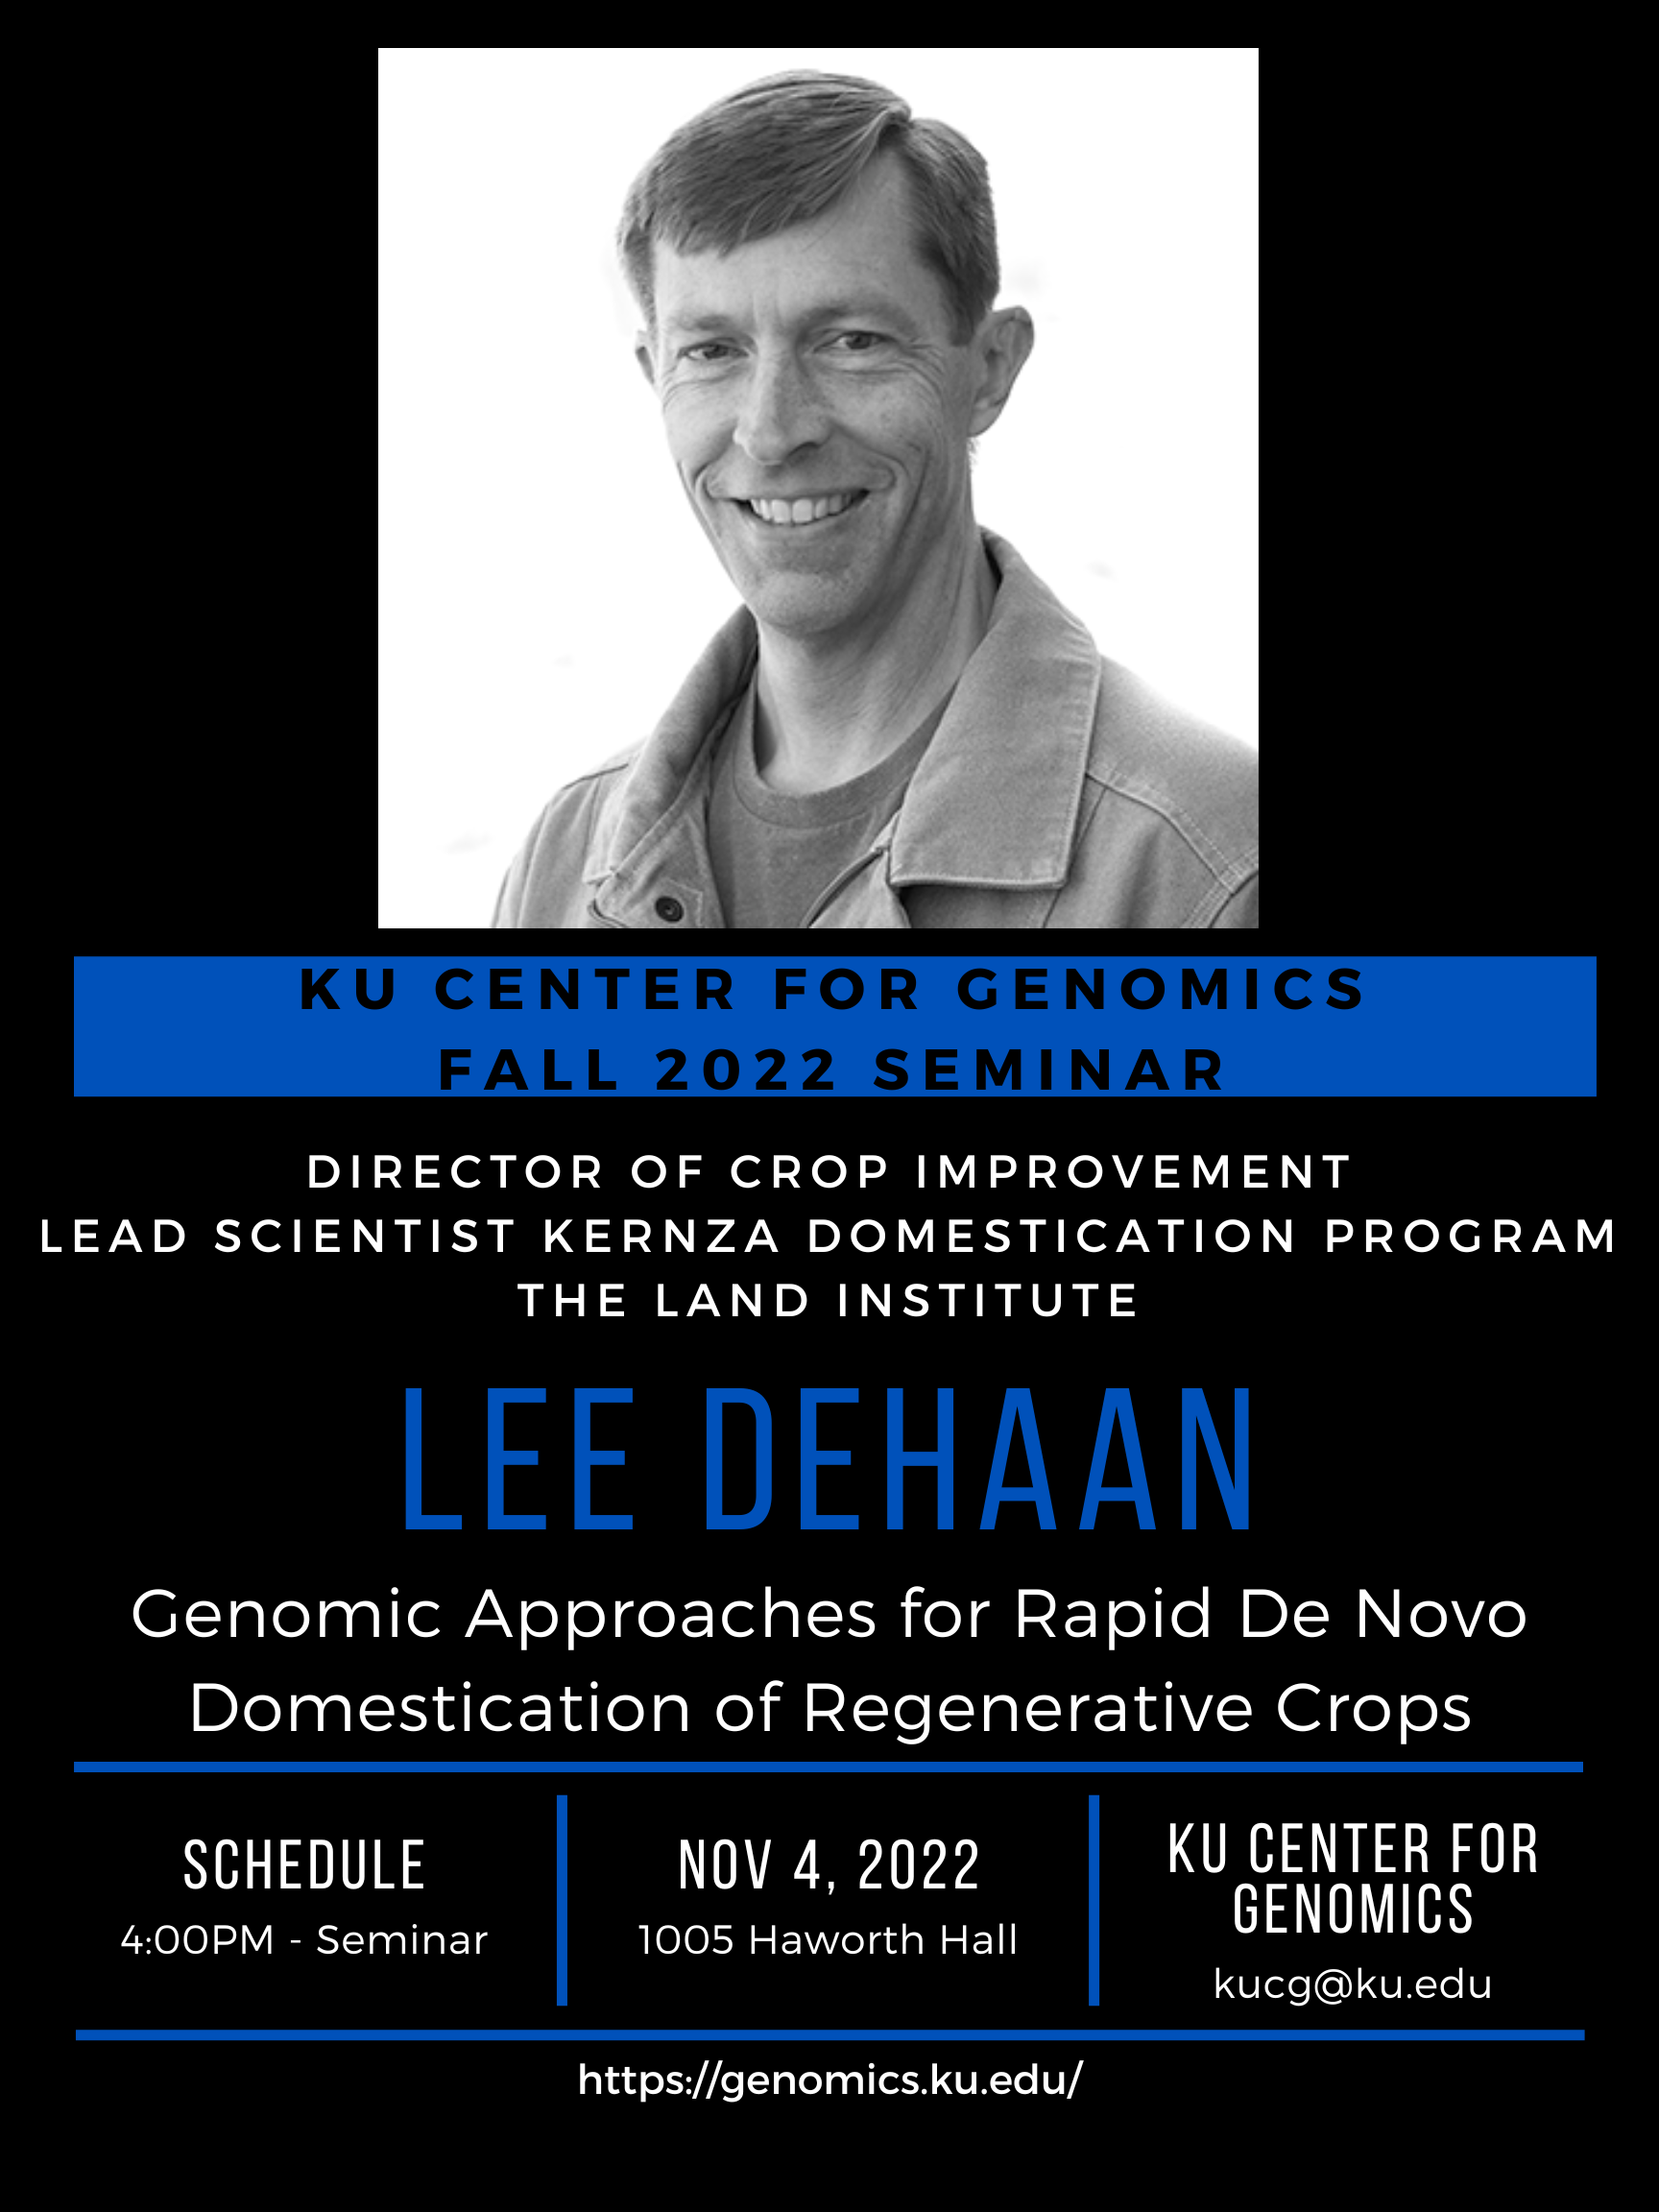 Poster inviting you to join KU Center for Genomics for its first event of the Fall 2022 semester with Lee Dehaan, director of crop improvement/lead scientist Kernza domestication program at the Land Institute, on Friday, Nov. 4 at 4 p.m. At 5 p.m. reception will follow.